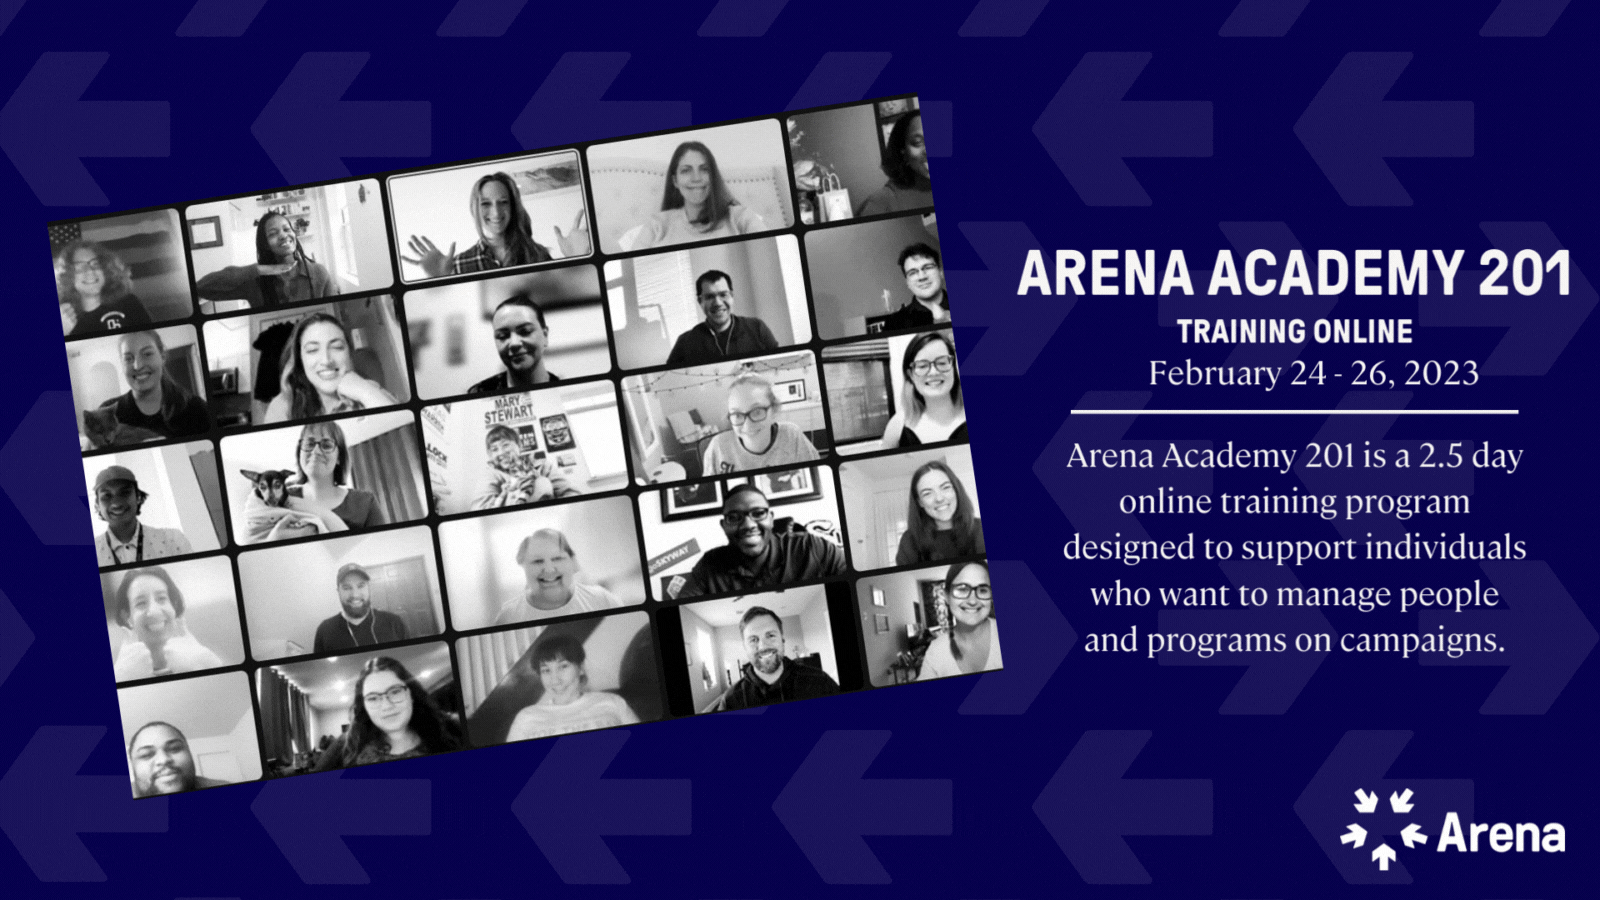 Arena Academy 201 will take place online from February 24th to February 26th, 2023. Image: black & white image of people dancing in a panel of Zoom video chat windows.